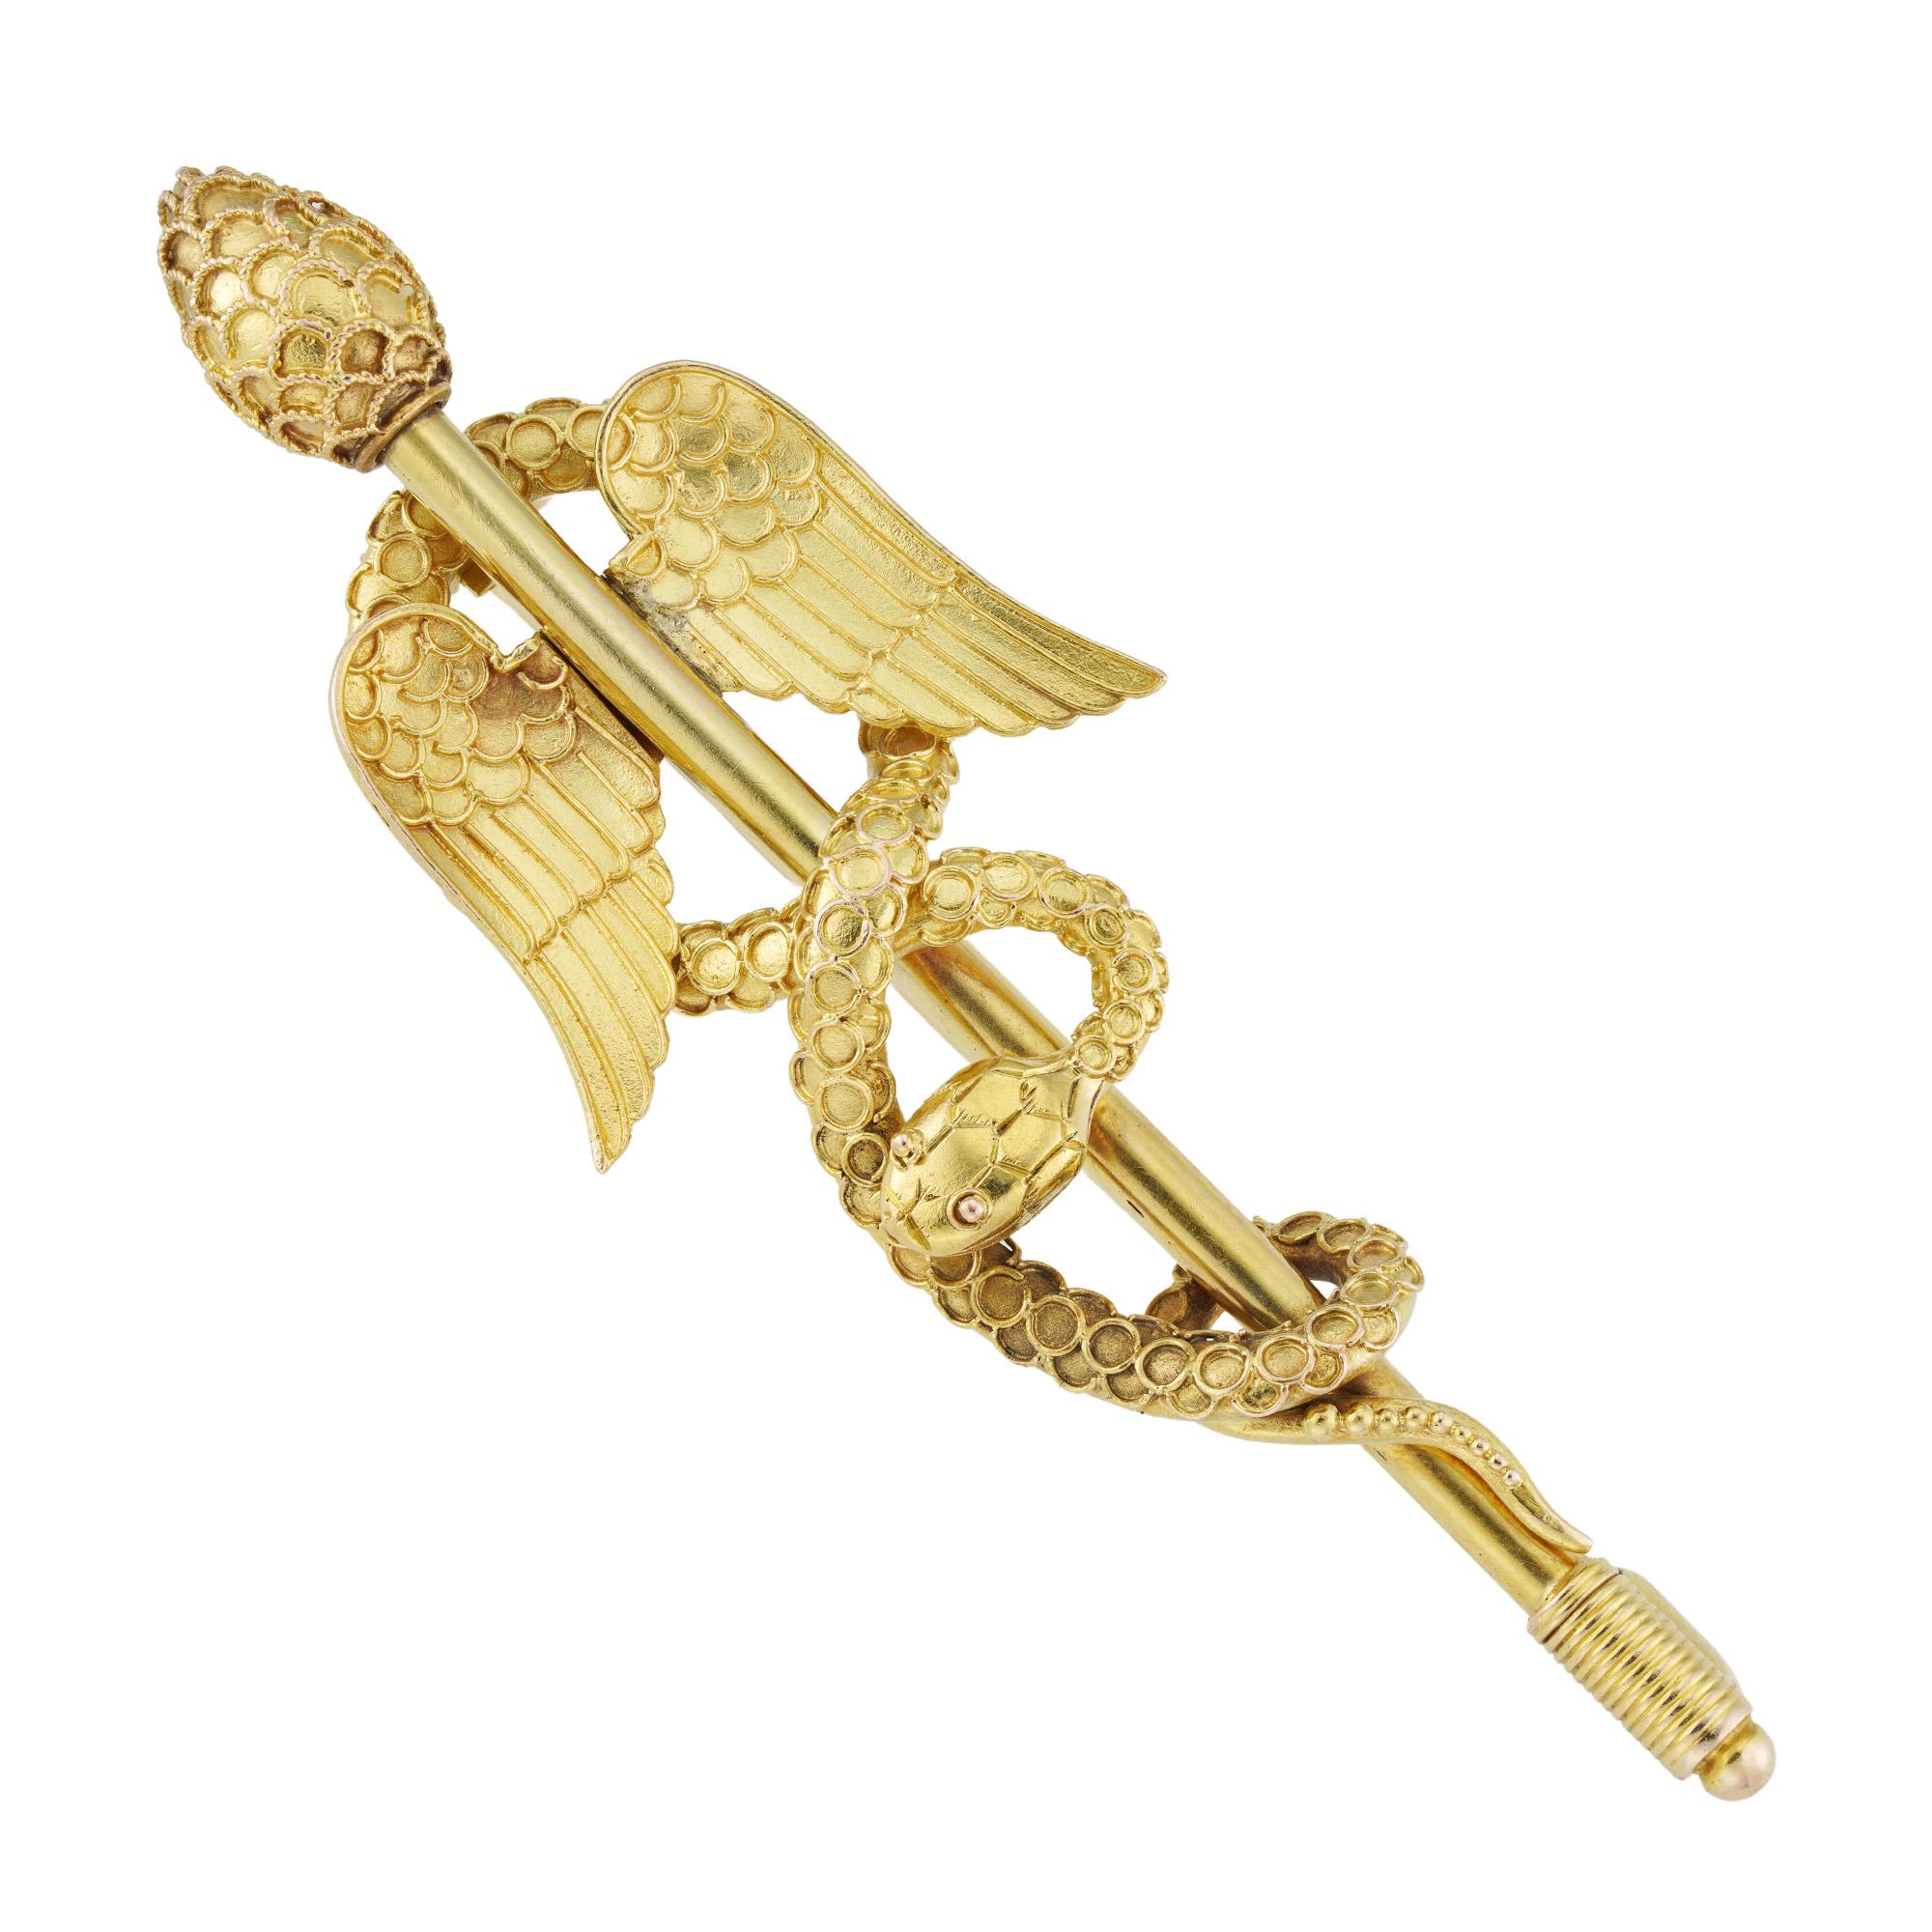 A mid 19th century Caduceus brooch, in the archaeological revival style with gold wirework and gold beading decoration, circa 1850, measuring 6x2cm, gross weight 7.9 grams.

This antique brooch is in very good condition for its age. Unmarked, tested